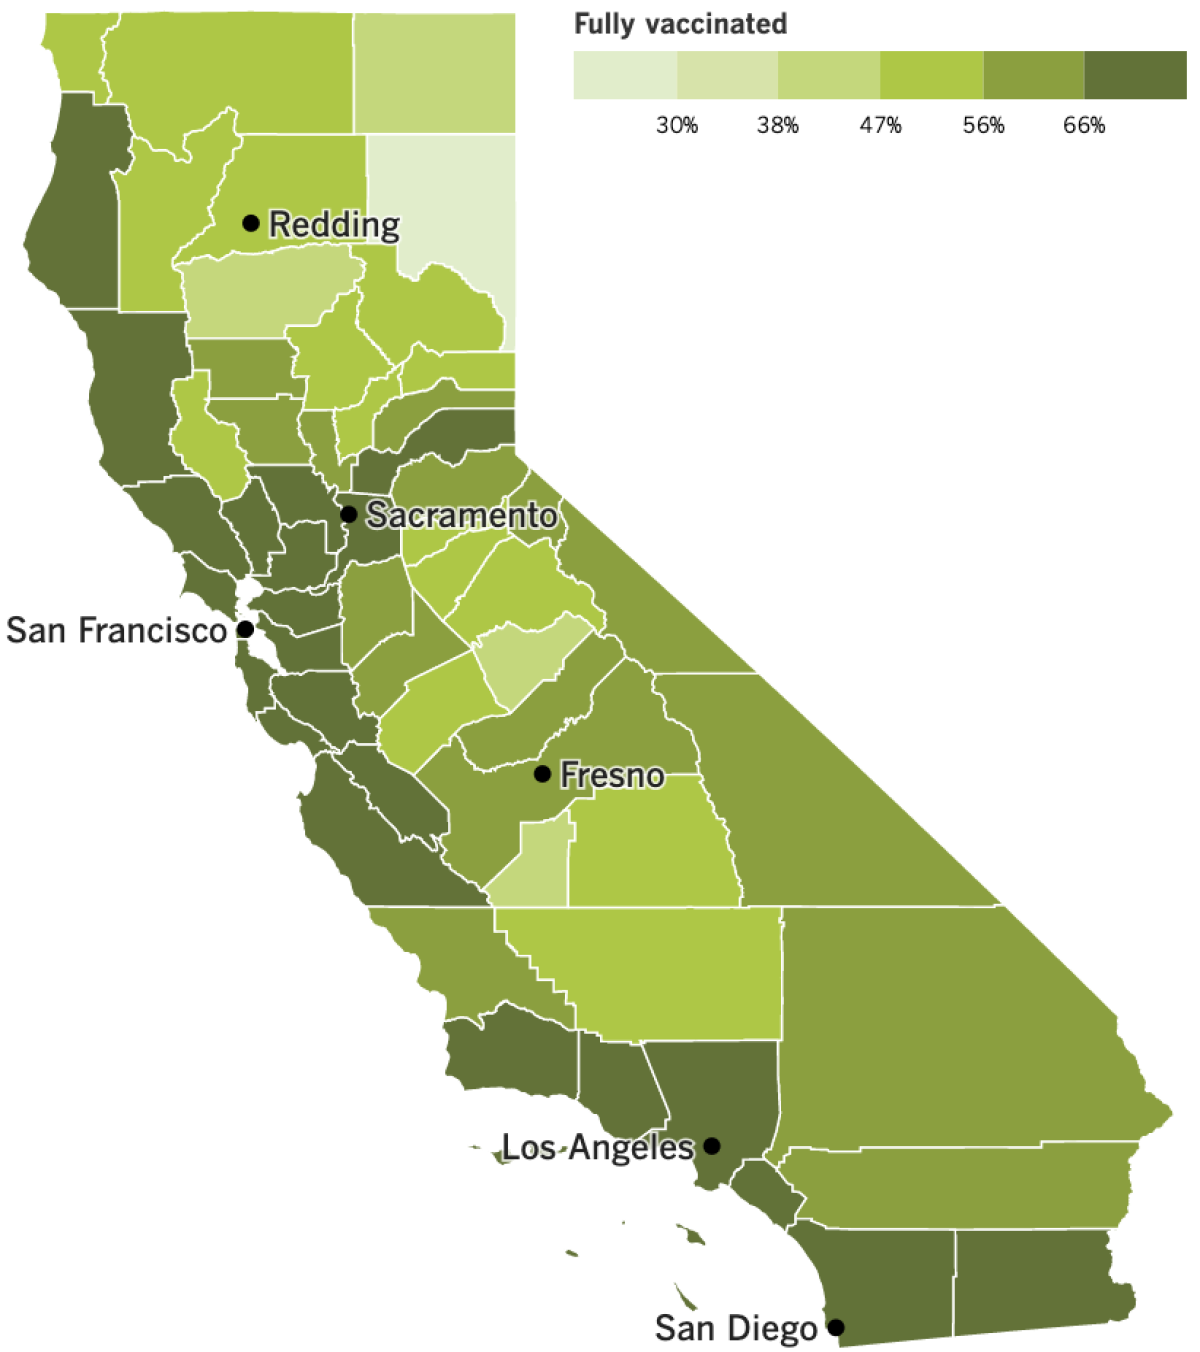 A map showing California's COVID-19 vaccination progress as of Aug. 2, 2022.